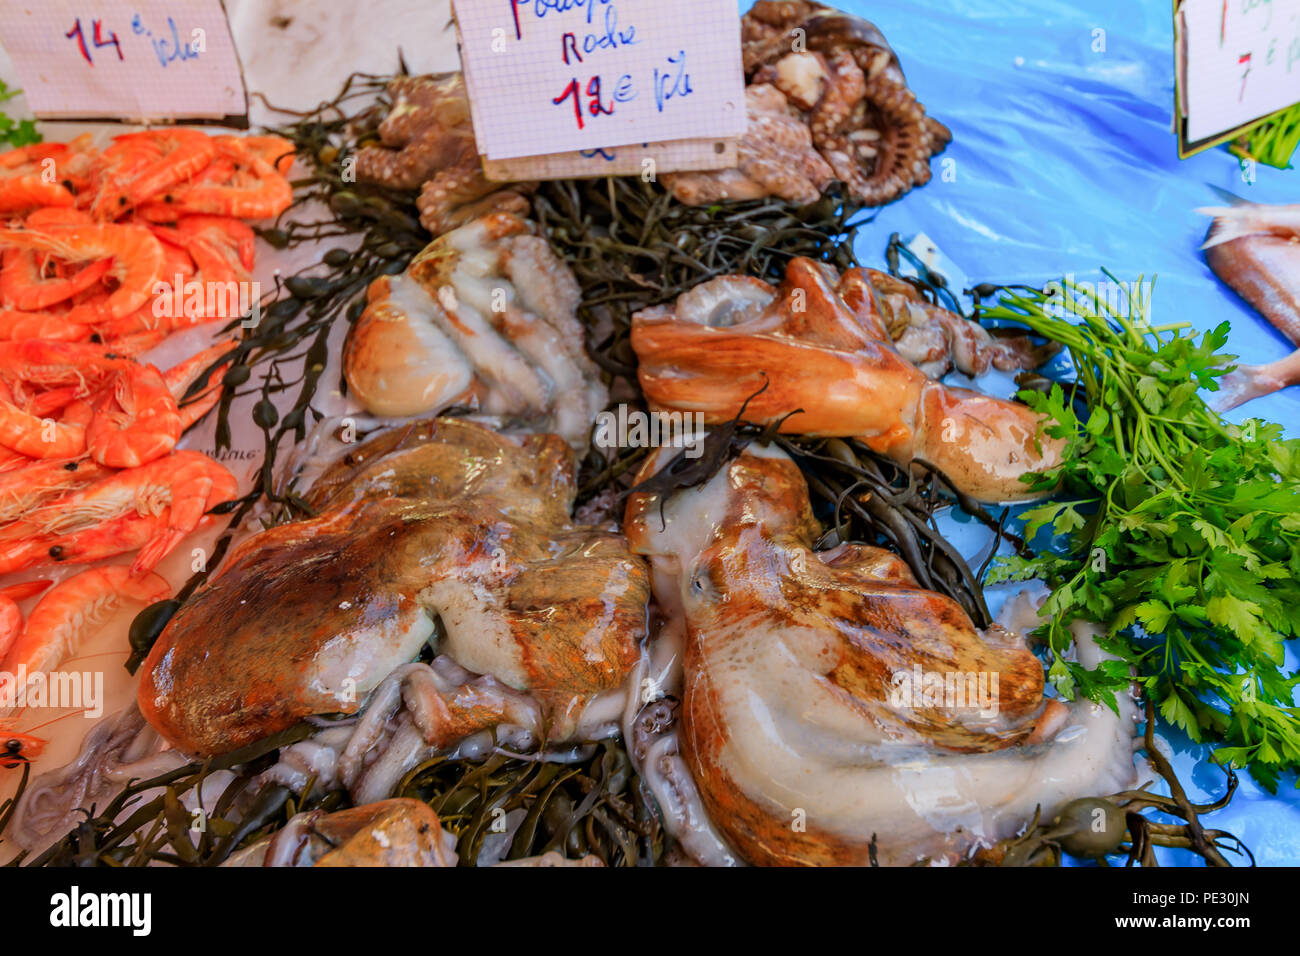 Fresh octopus and shrimp on display at the fish market in Nice France Stock Photo